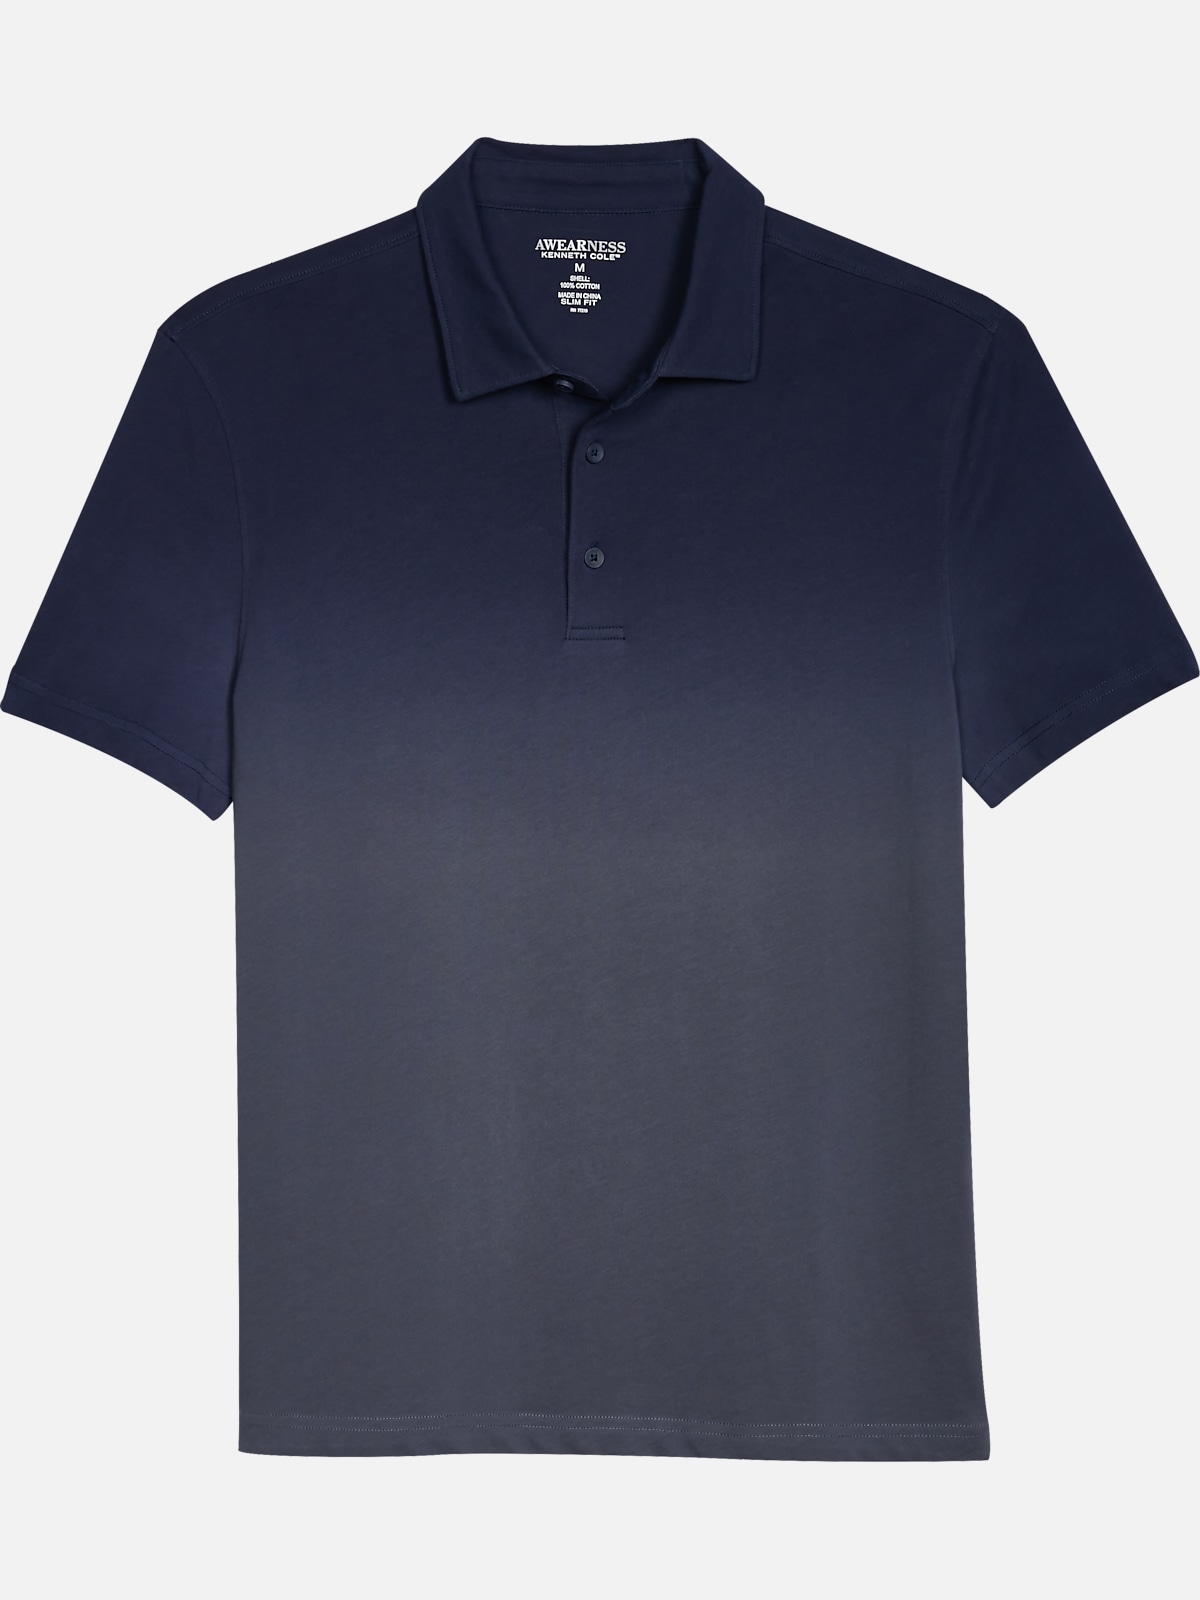 Awearness Kenneth Cole Slim Fit Polo Shirt | All Sale| Men's Wearhouse